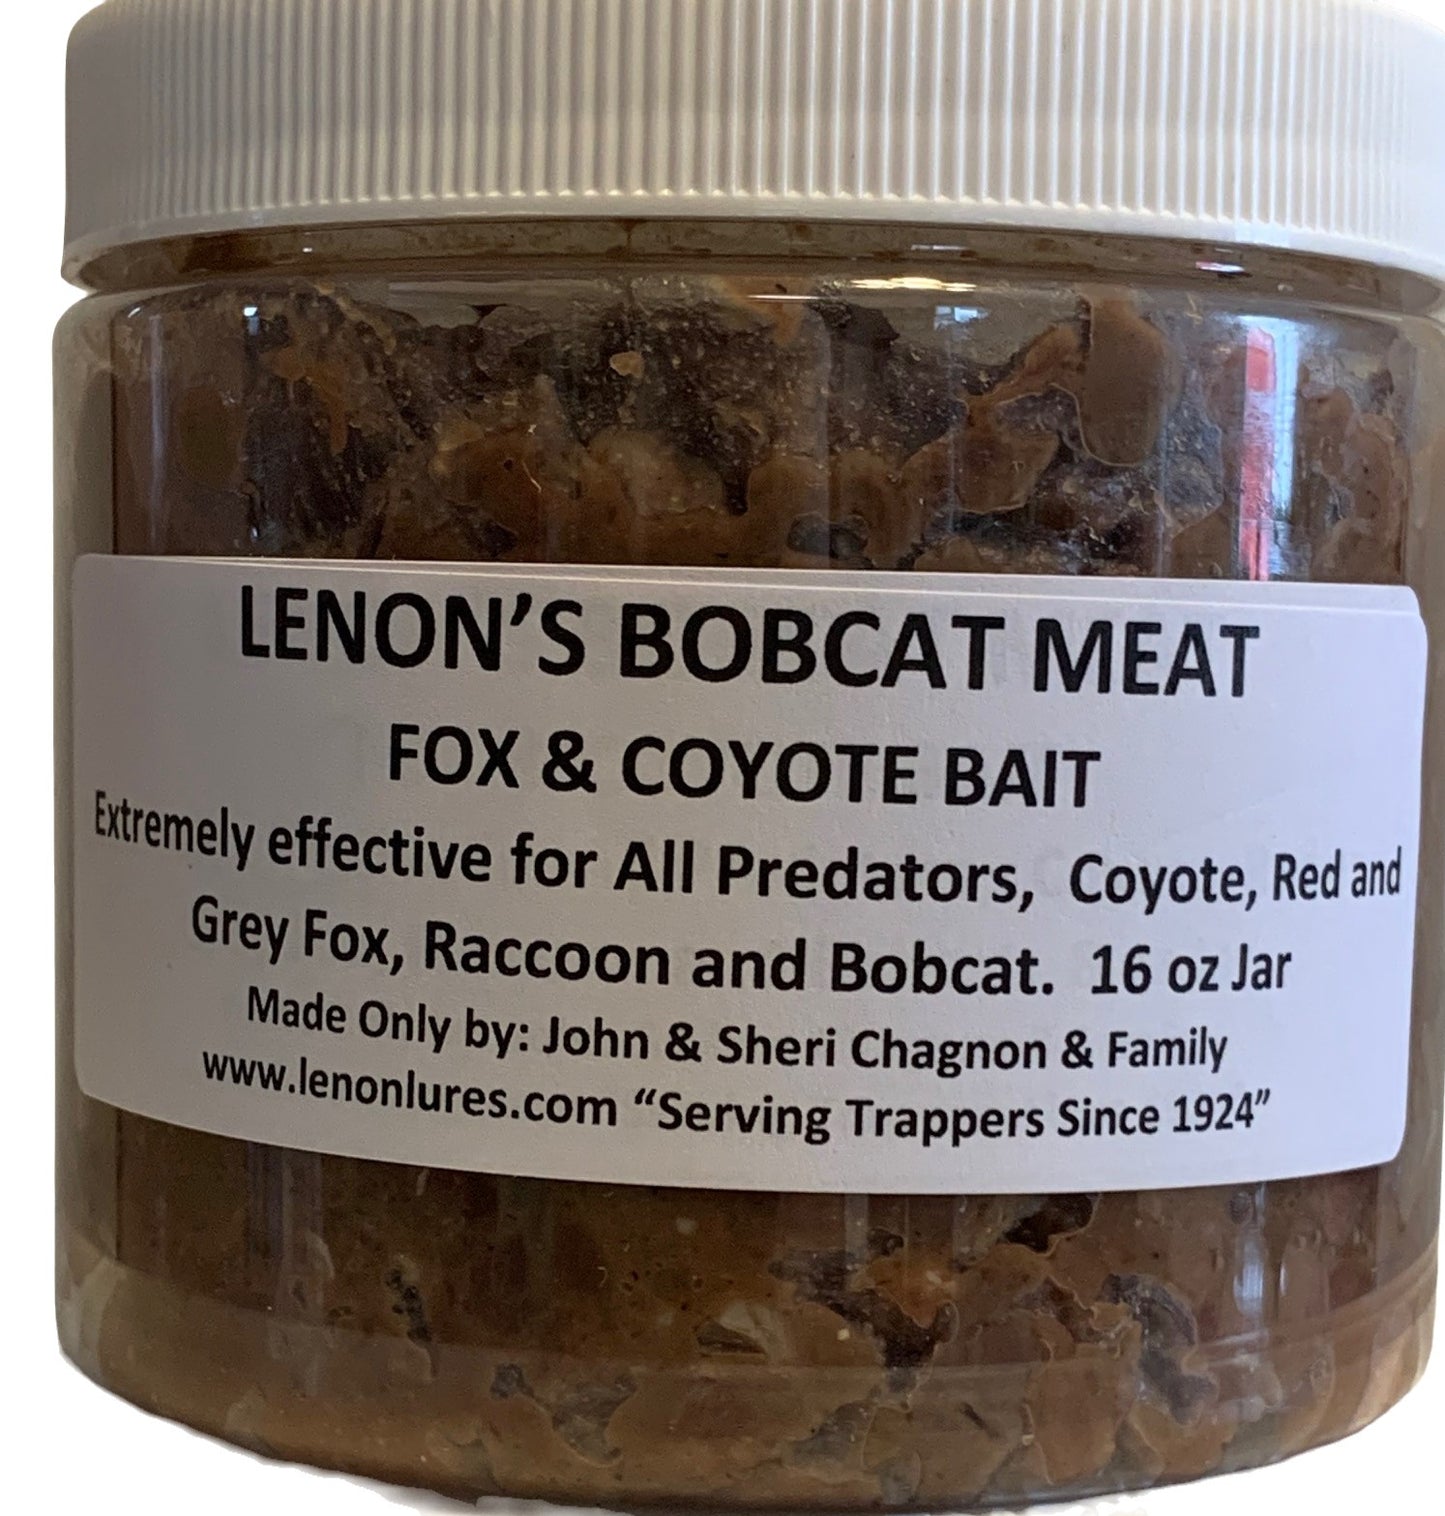 Lenon's Bobcat Meat - Fox and Coyote Bait 8 oz. to Gallon Jar